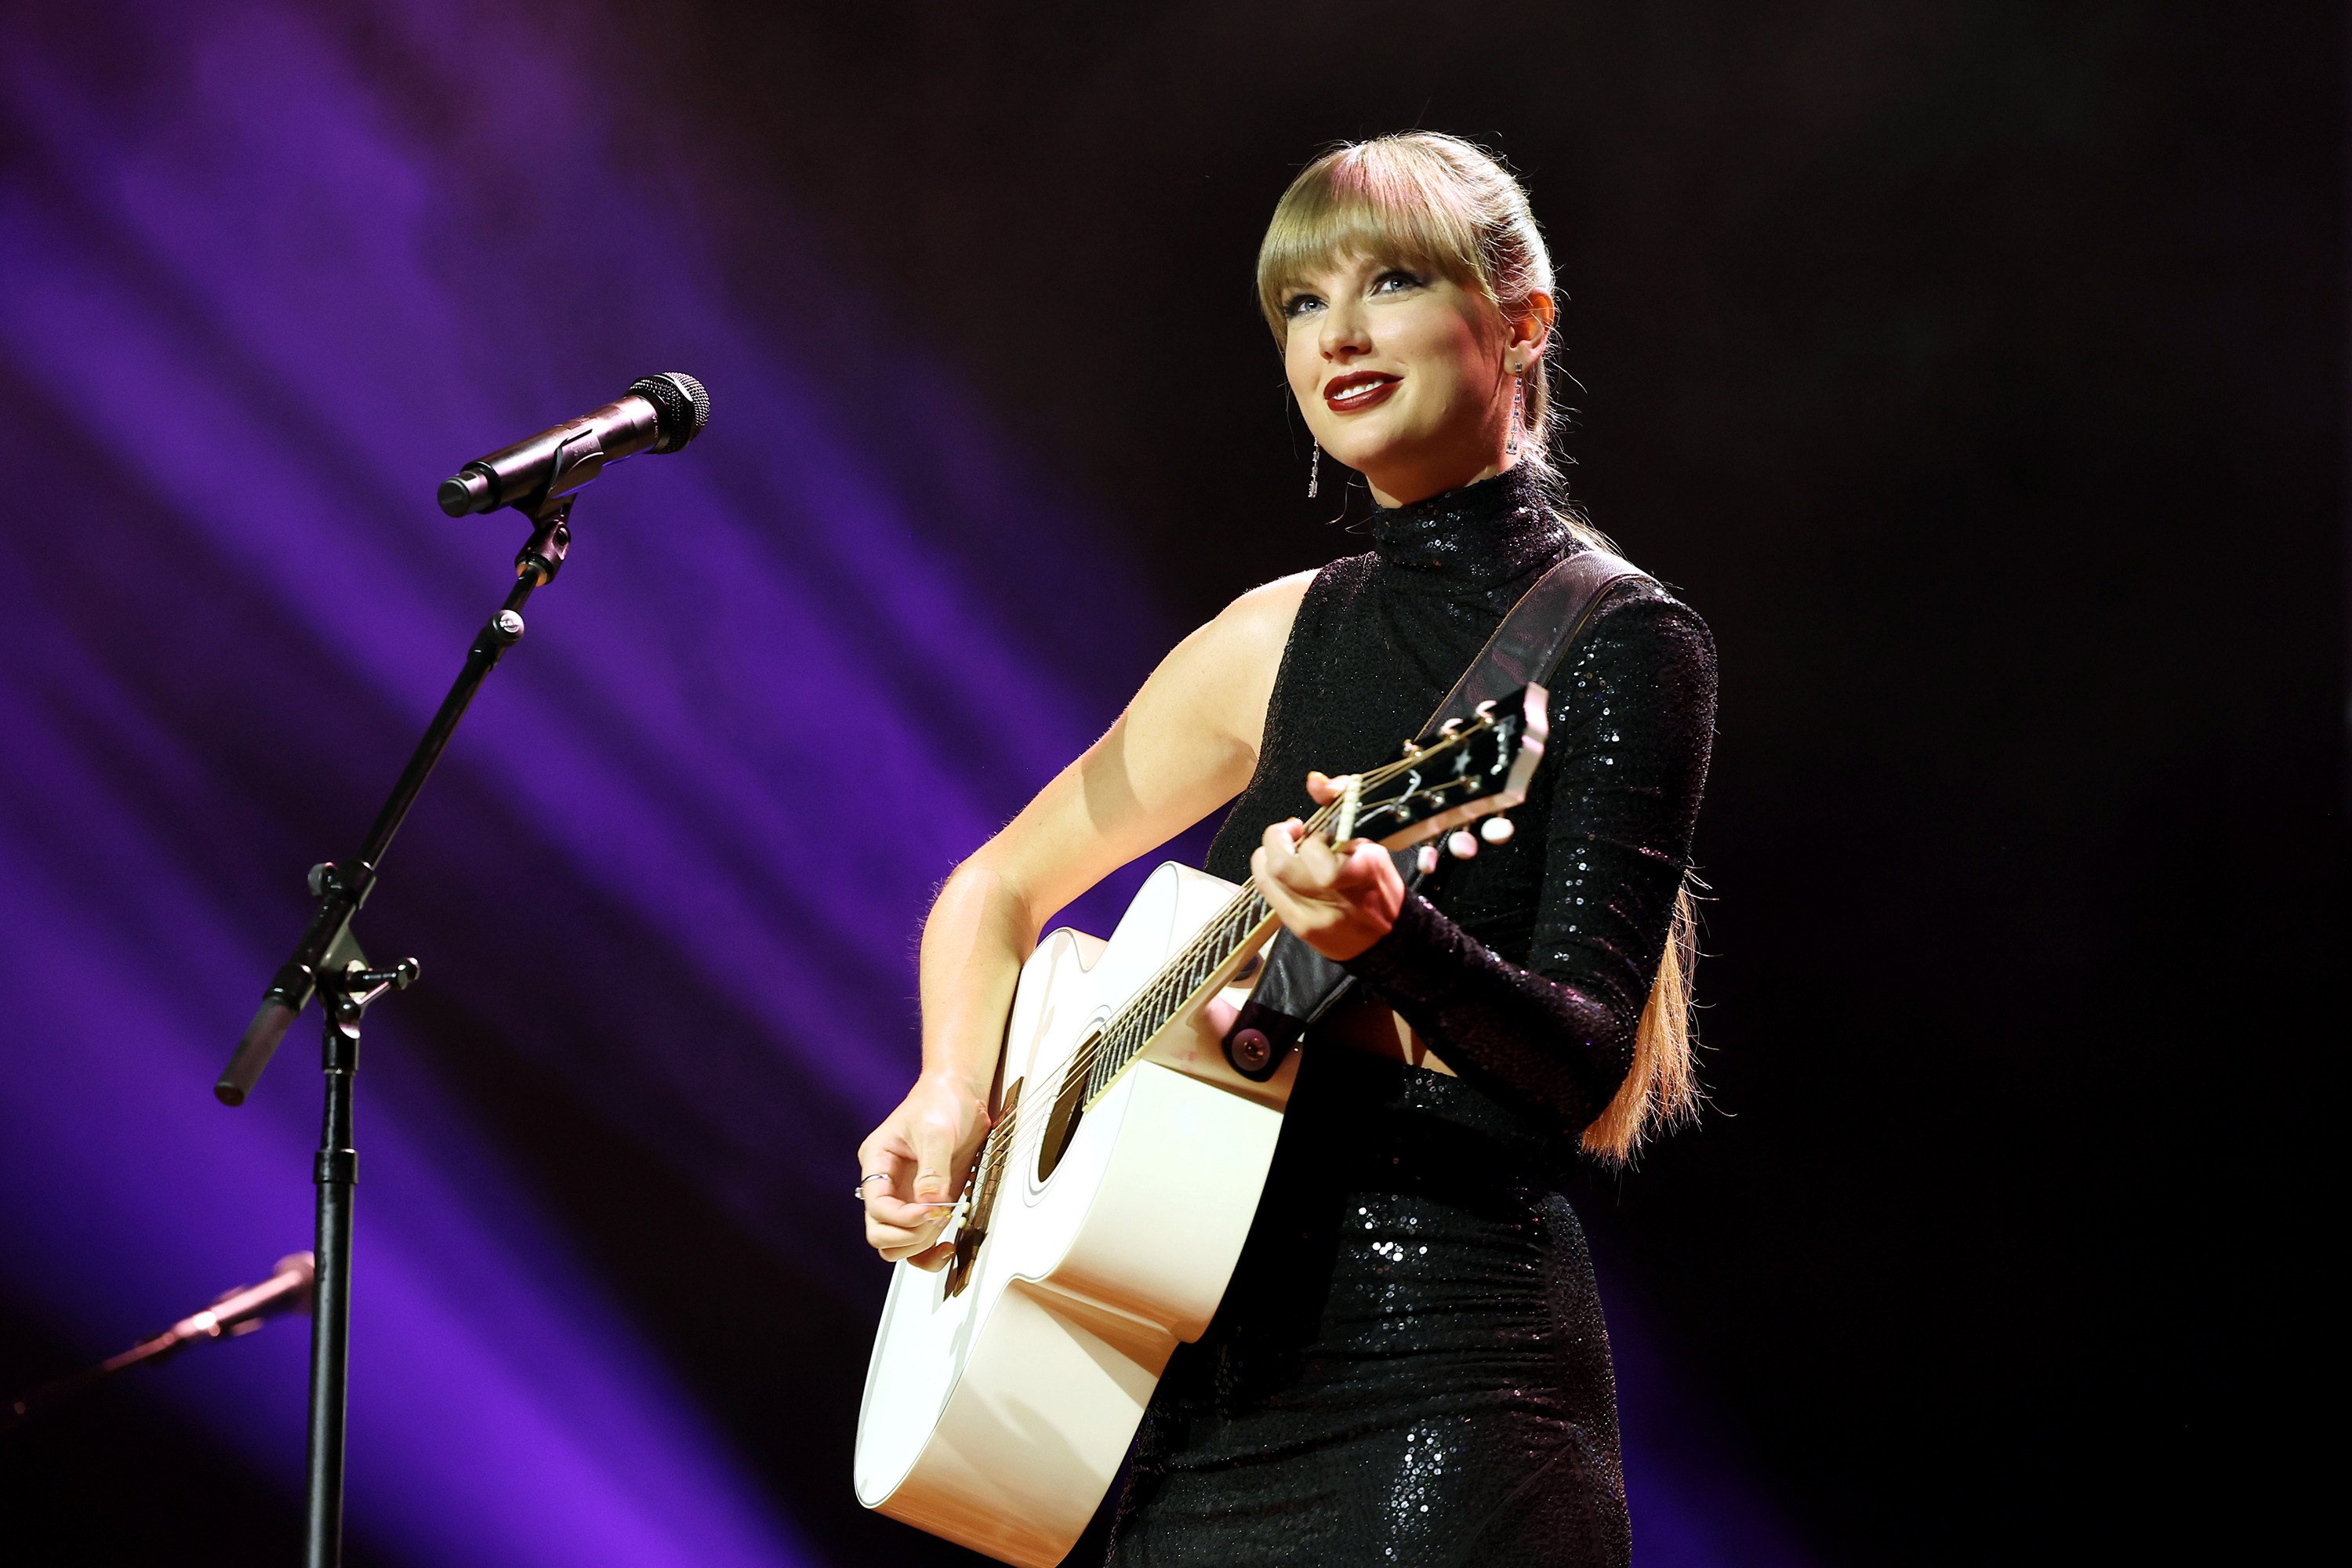 Taylor Swift has been making bank with her Eras Tour, but will she perform at the Super Bowl half-time show anytime soon? Photo: TNS